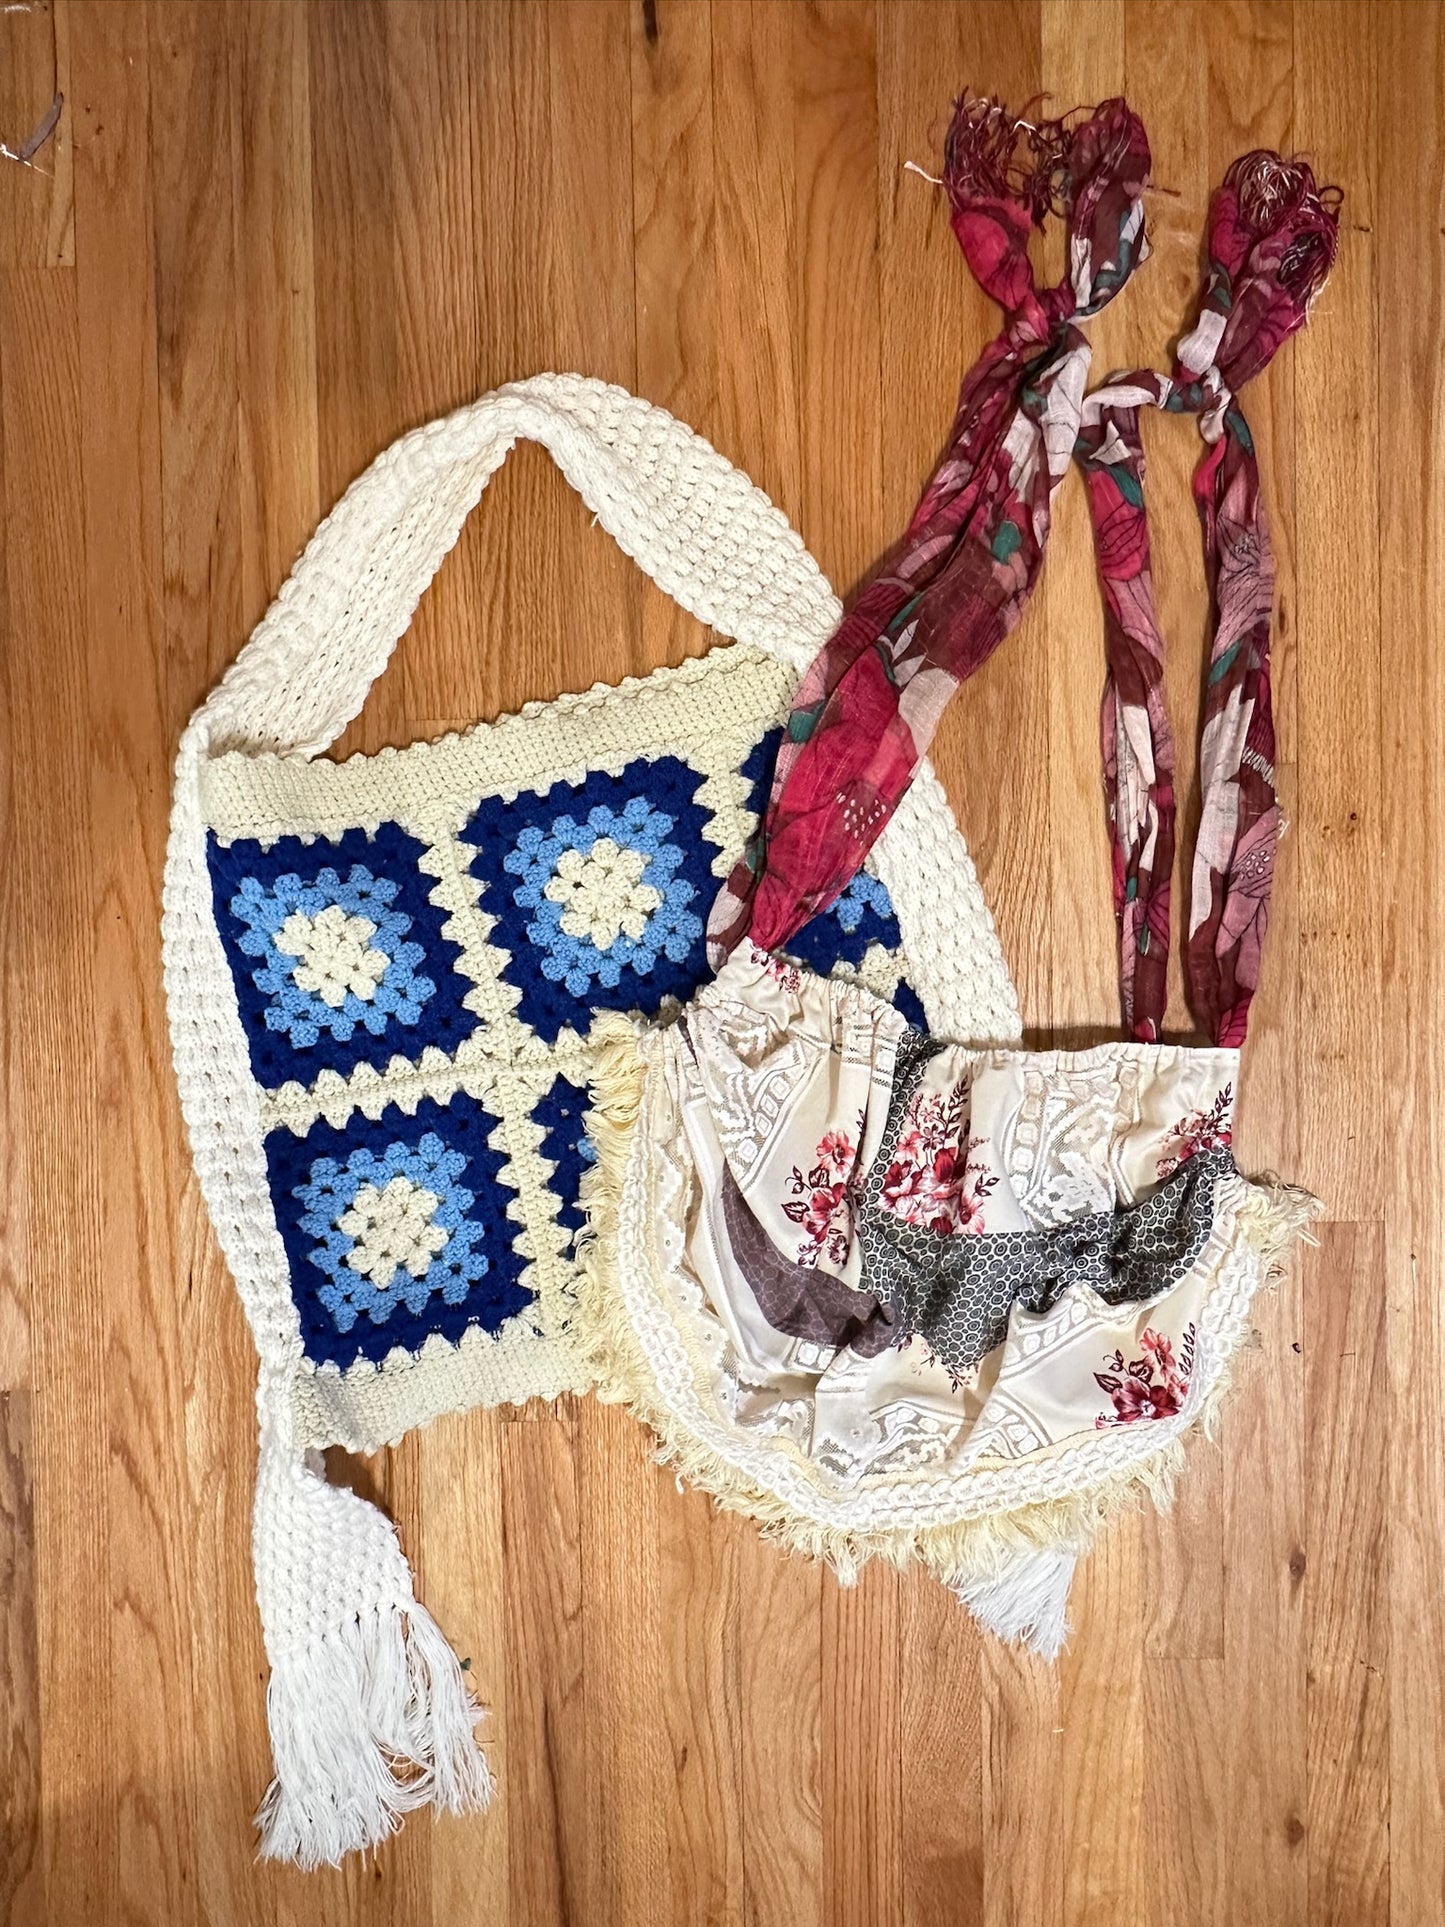 Reclaimed Come Together Circle Bag